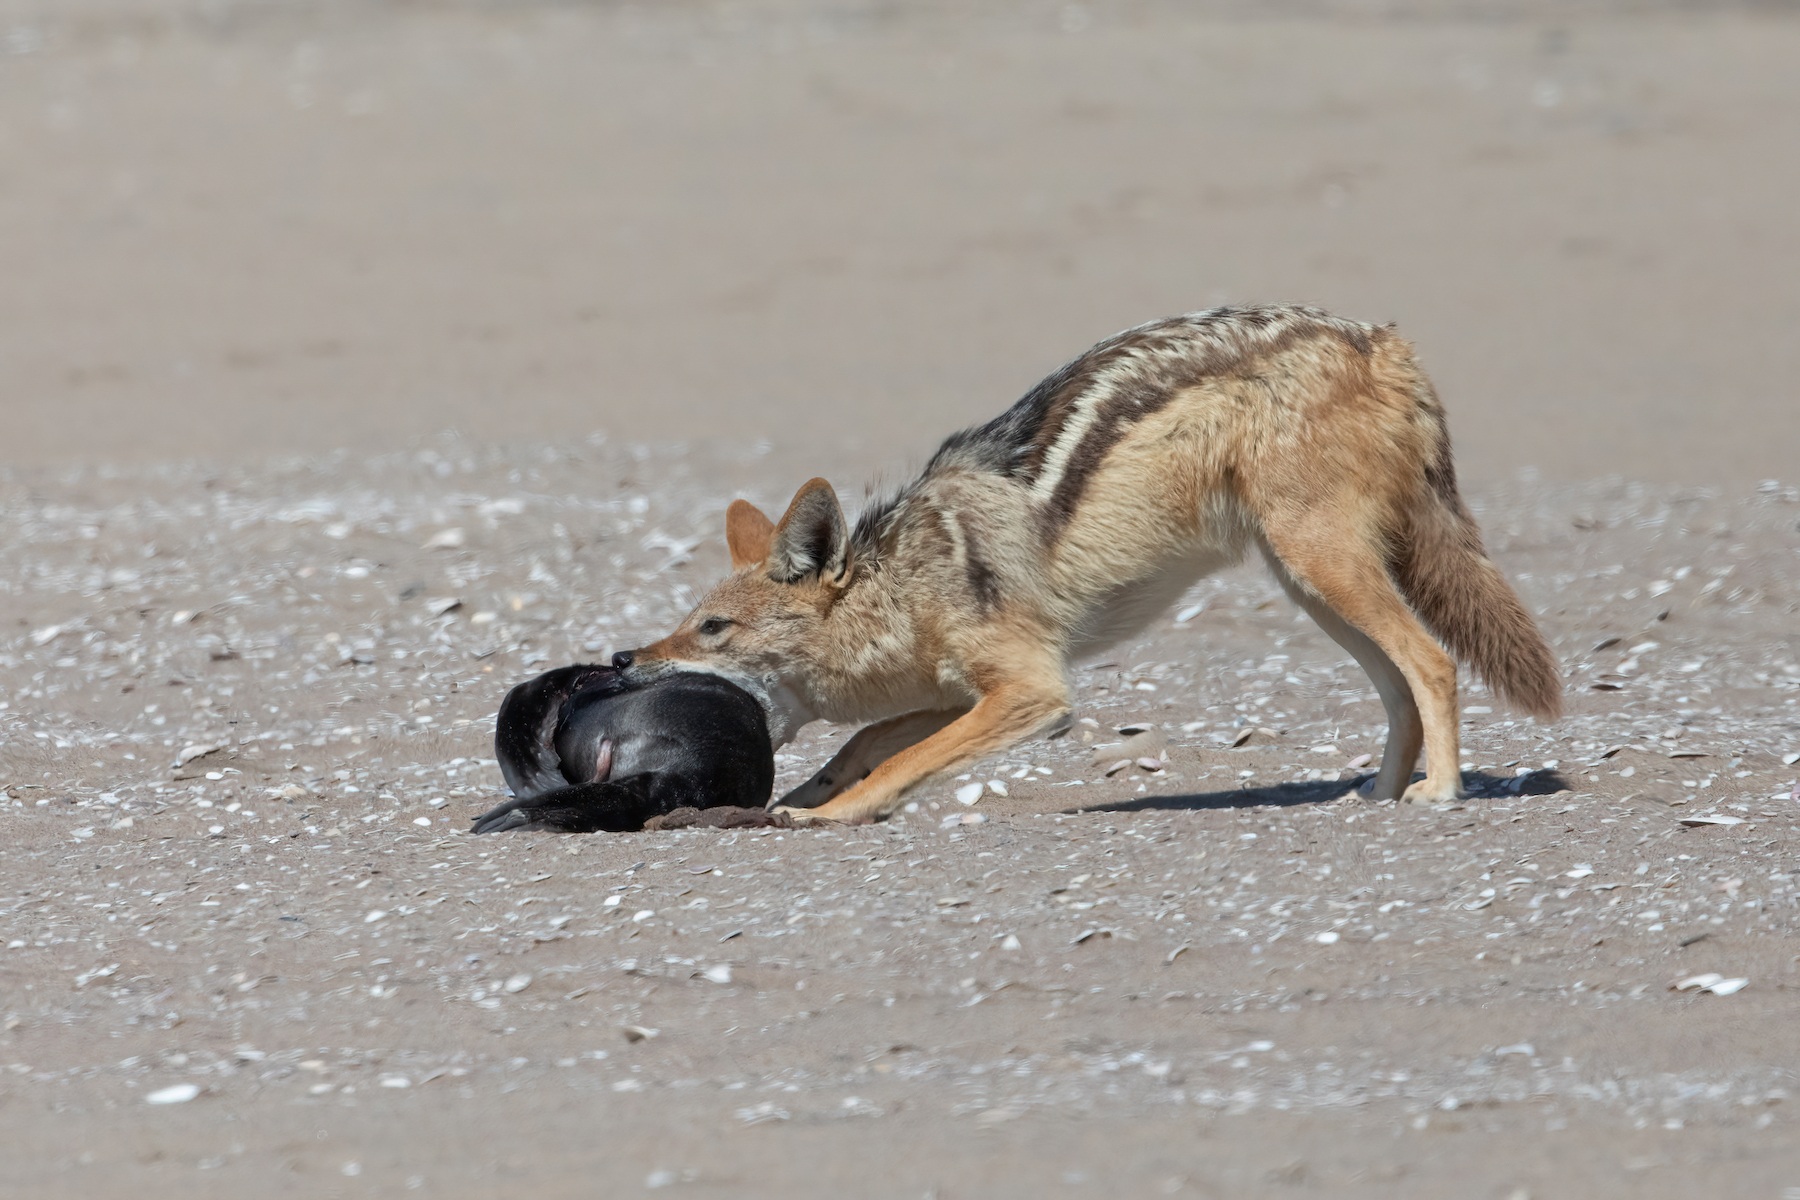 During our Sandwich Harbour adventure we will search for unique wildlife behaviour including Black-backed Jackals preying on fur seal pups